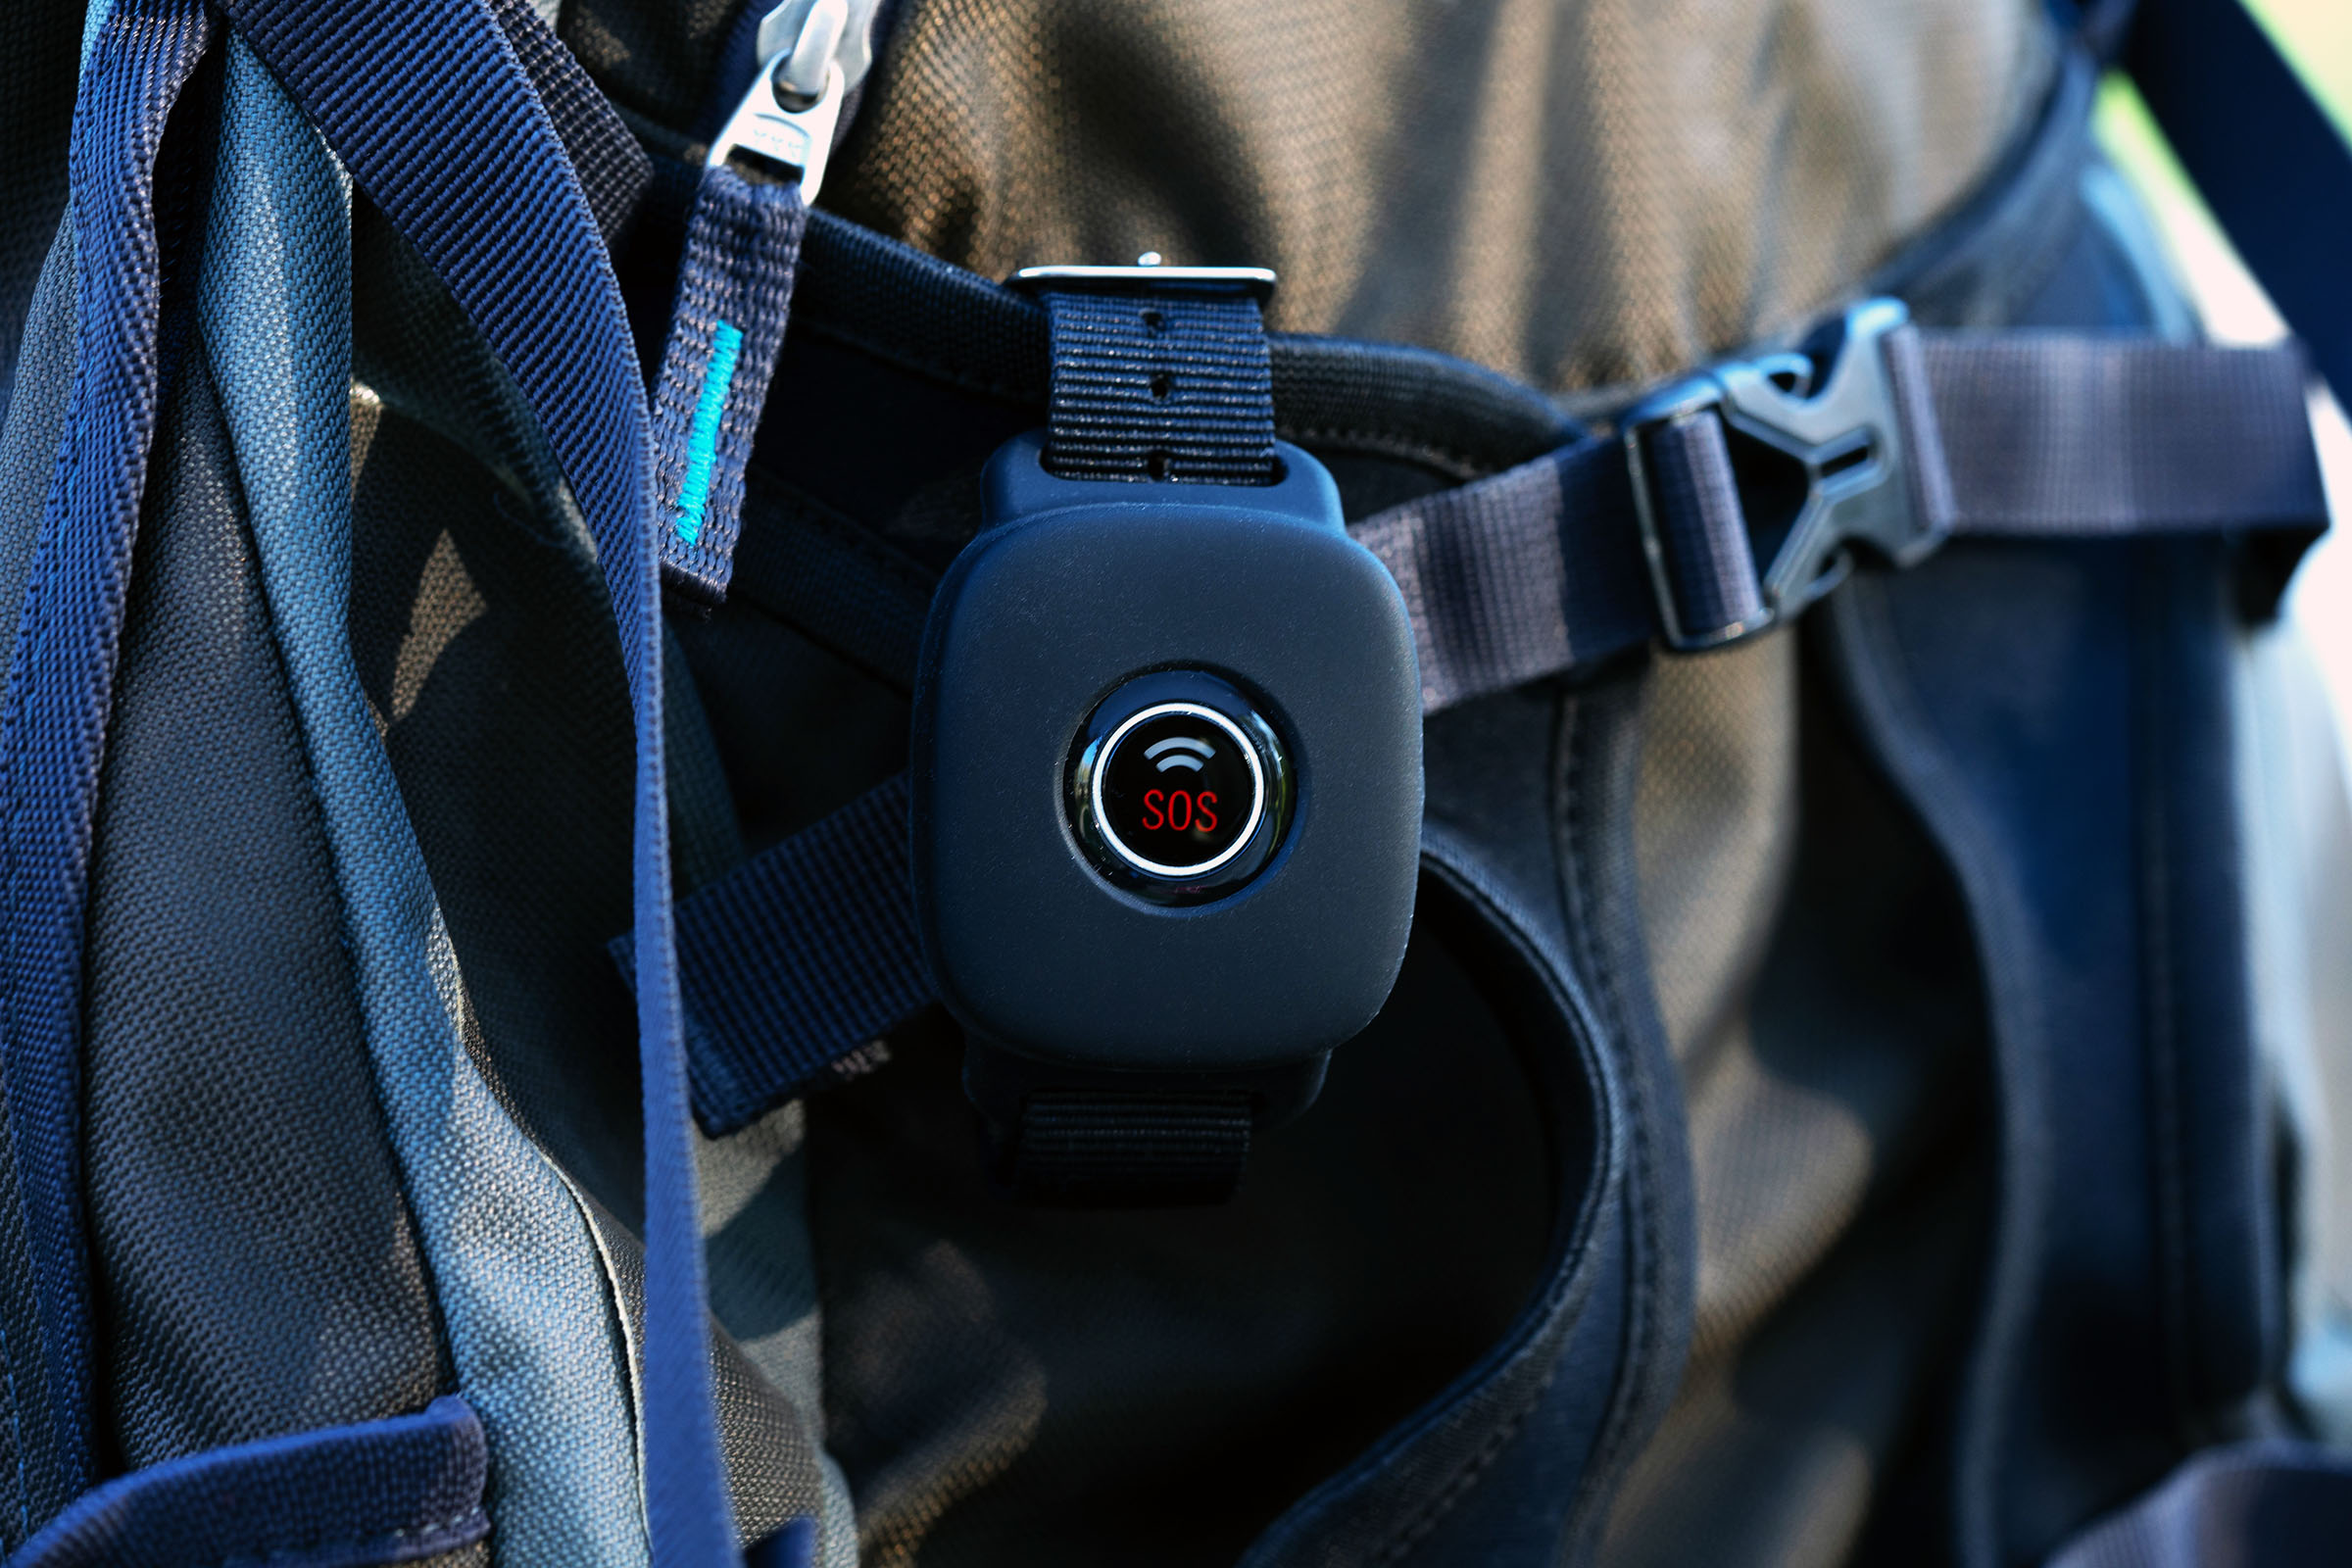 TRACKILIVE TL-10 4G Outdoor